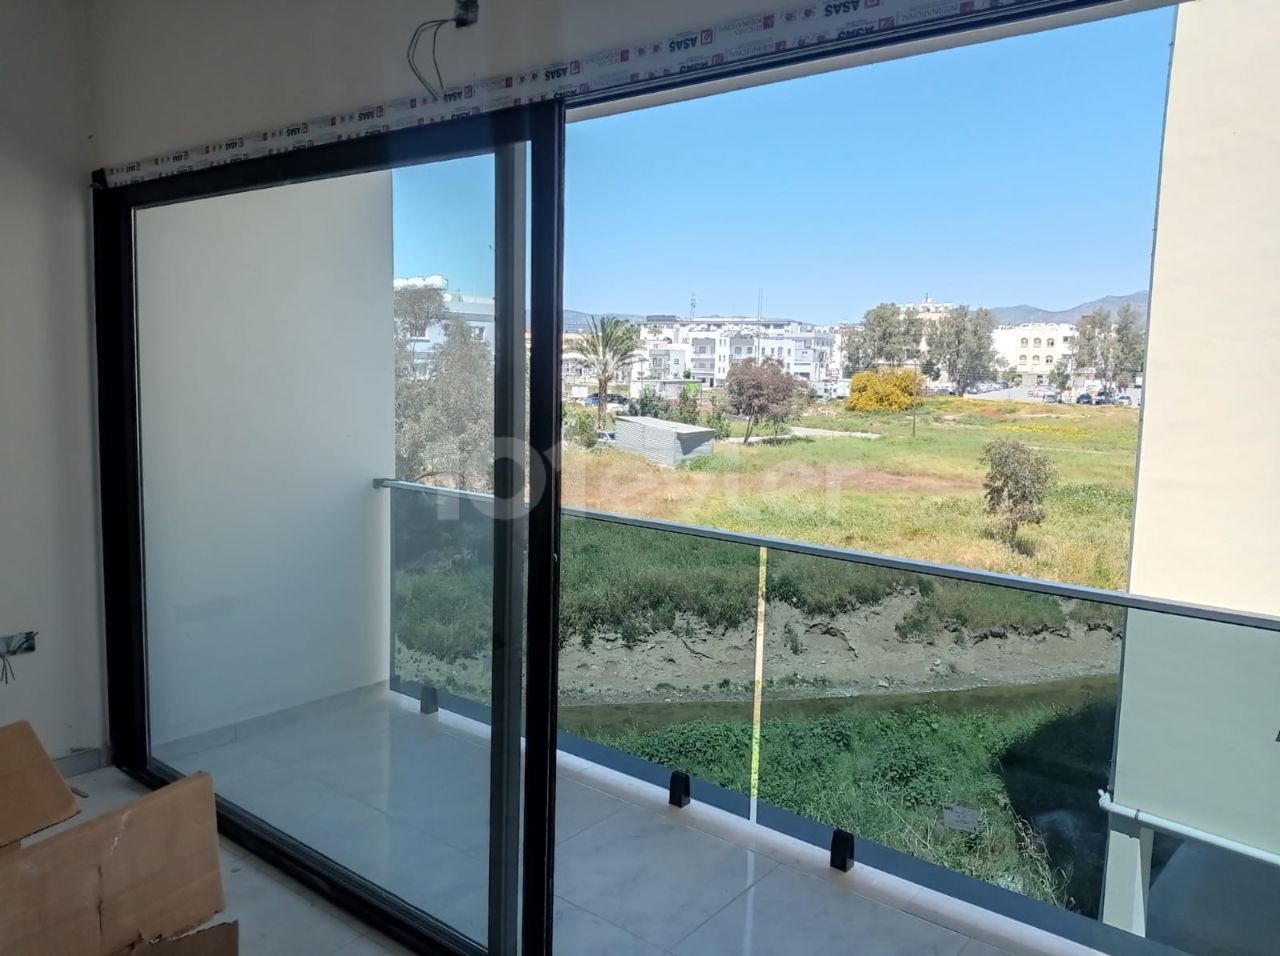 2+1 ground floor for sale in the marmara region, in the center of the city, within walking distance to the metropolis, in a splendid location ** 